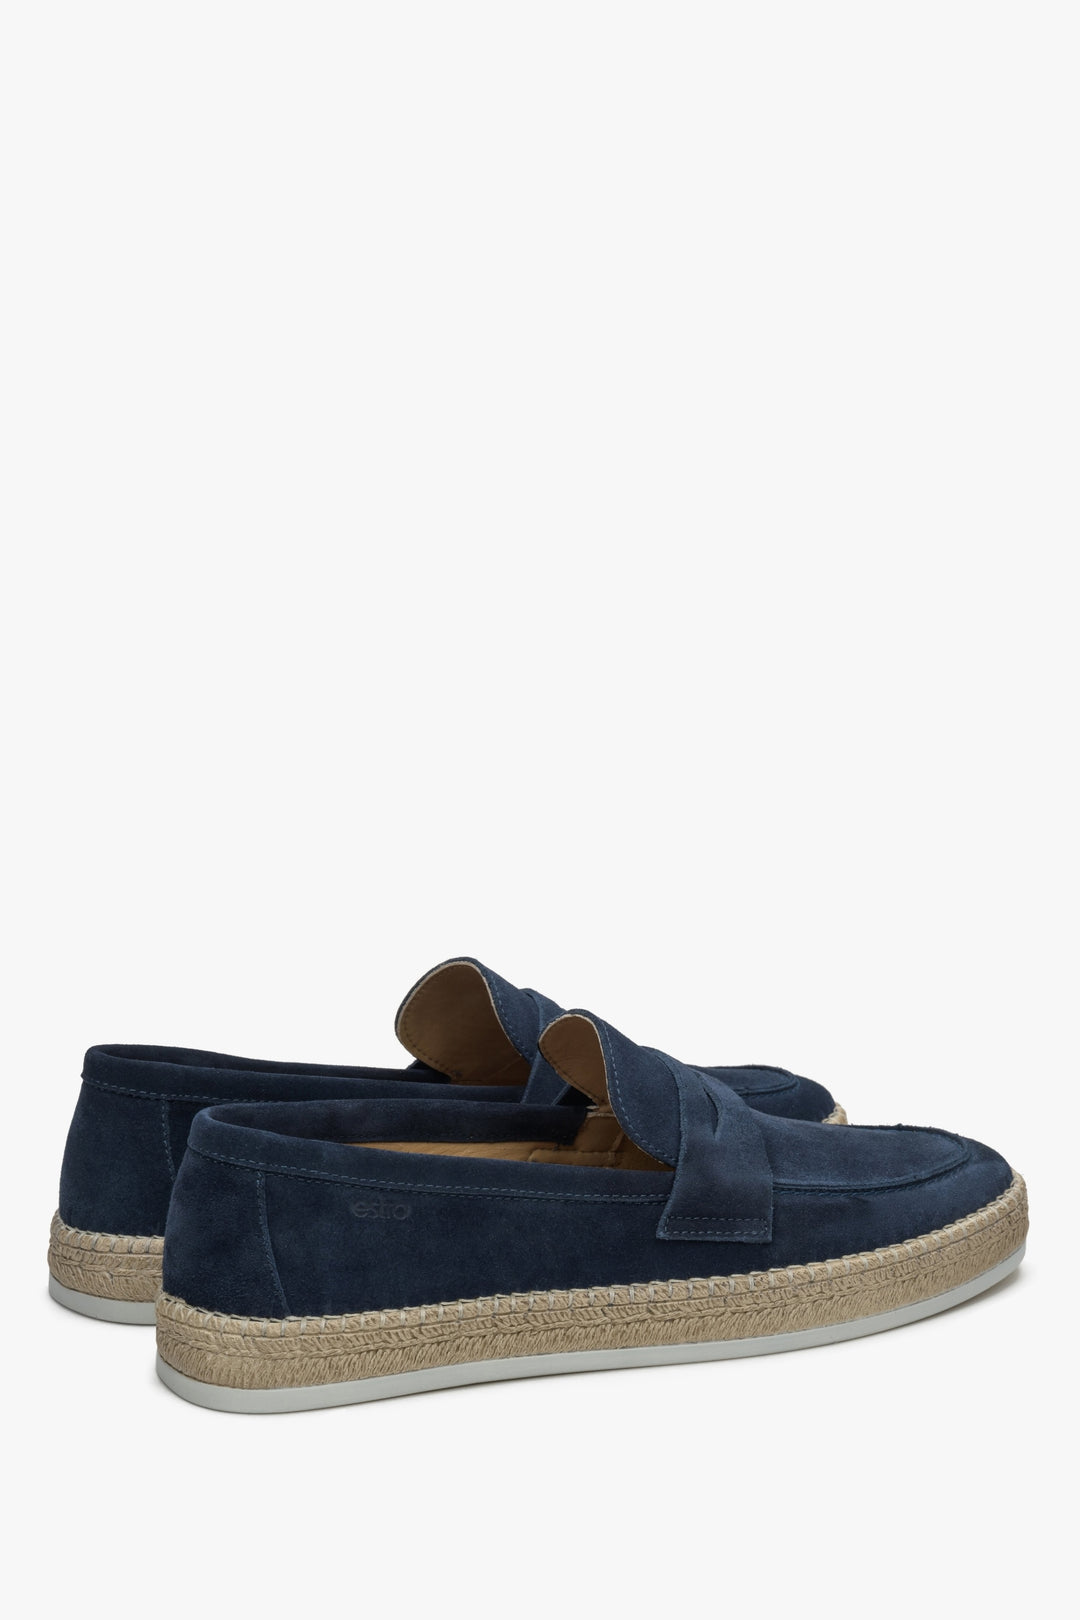 Estro navy blue men's velour moccasins - close-up on the side line and heel counter of the shoes.